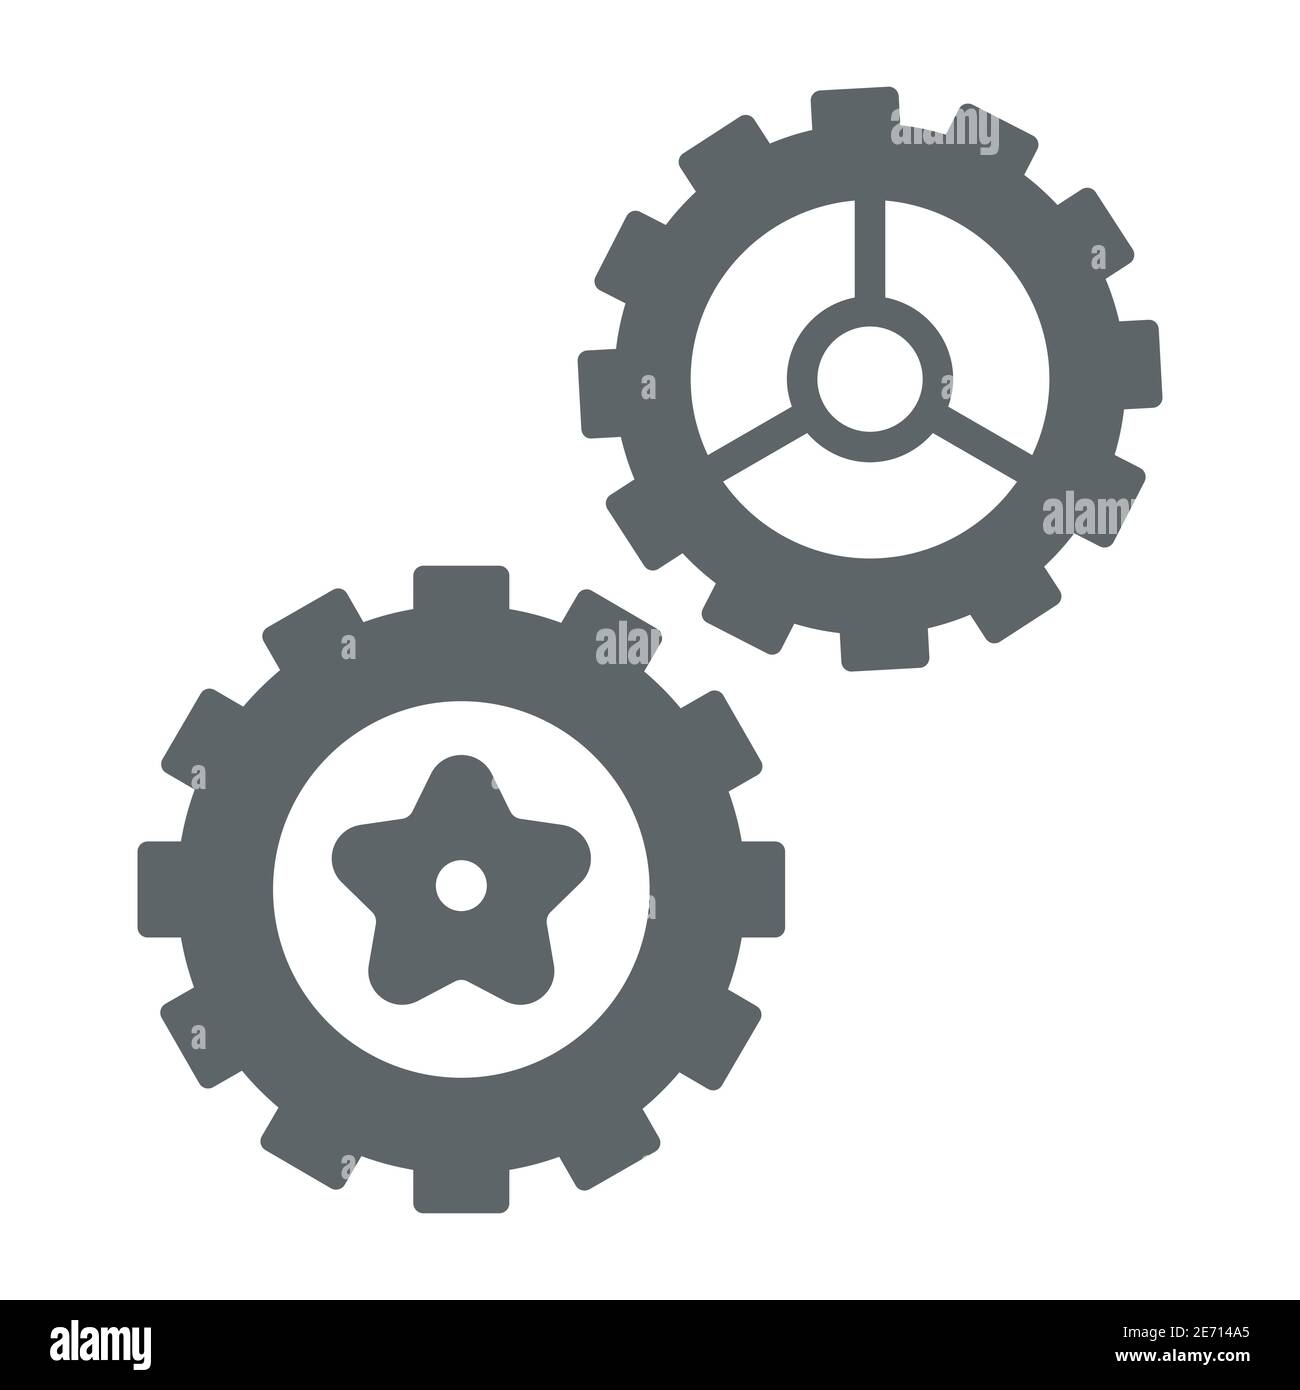 Rotating gears solid icon, technology concept, Cogwheel gear mechanism sign on white background, two gear wheels icon in glyph style for mobile Stock Vector